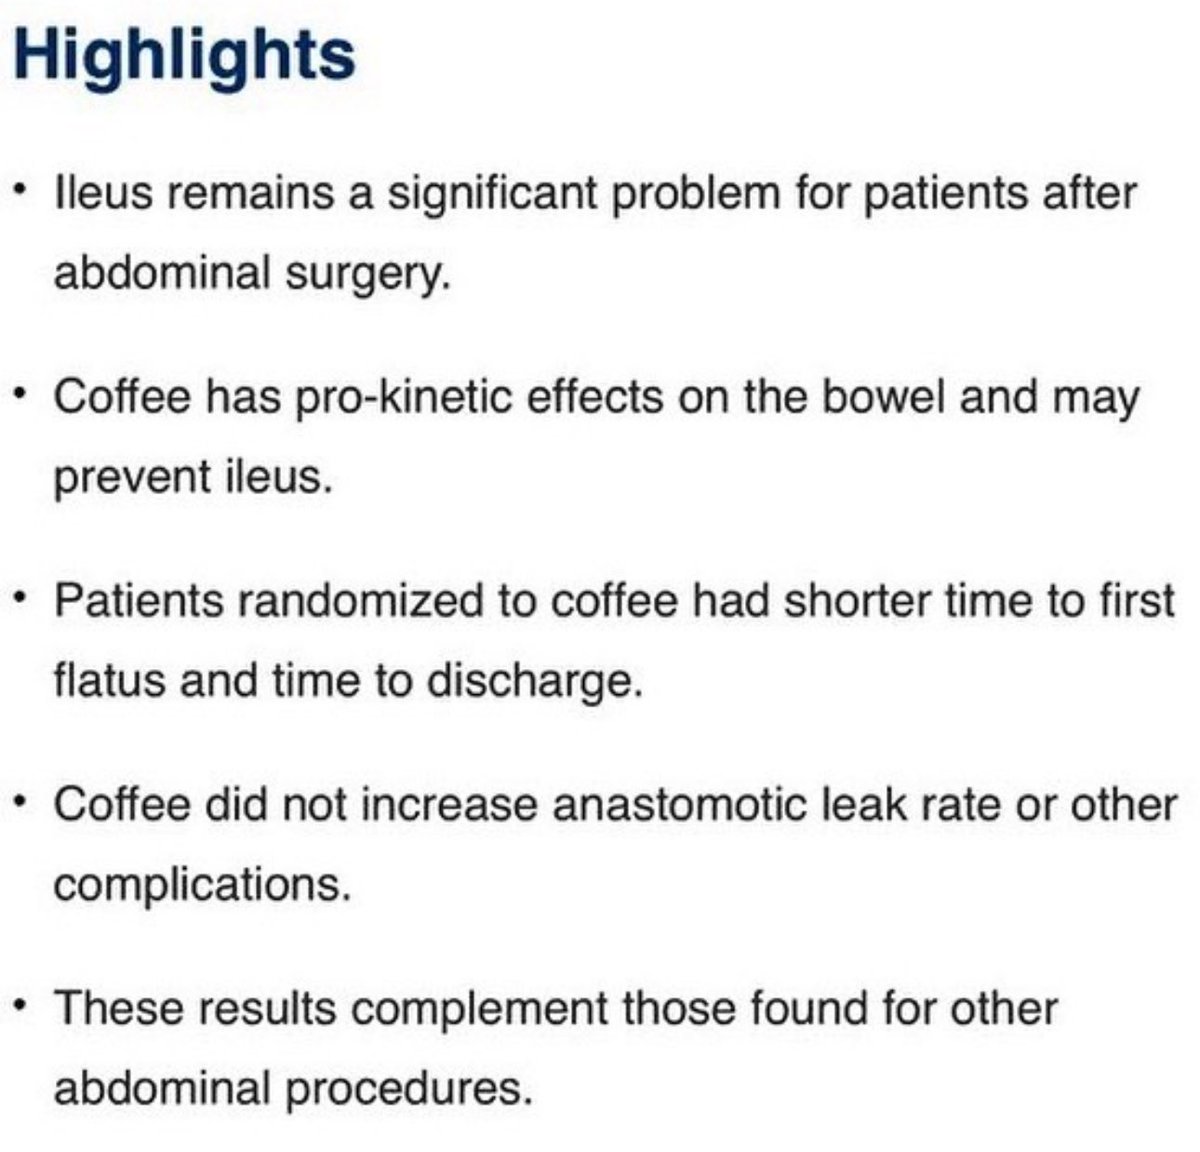 Clinical trial data supporting benefits of coffee! ☕️ 😋 👉 Coffee promotes return of bowel function after surgery 👉Coffee improved time to discharge post-op Make sure patients get their ☕️! americanjournalofsurgery.com/article/S0002-… #MedEd #MedTwitter #ERASavesLives #Surgery